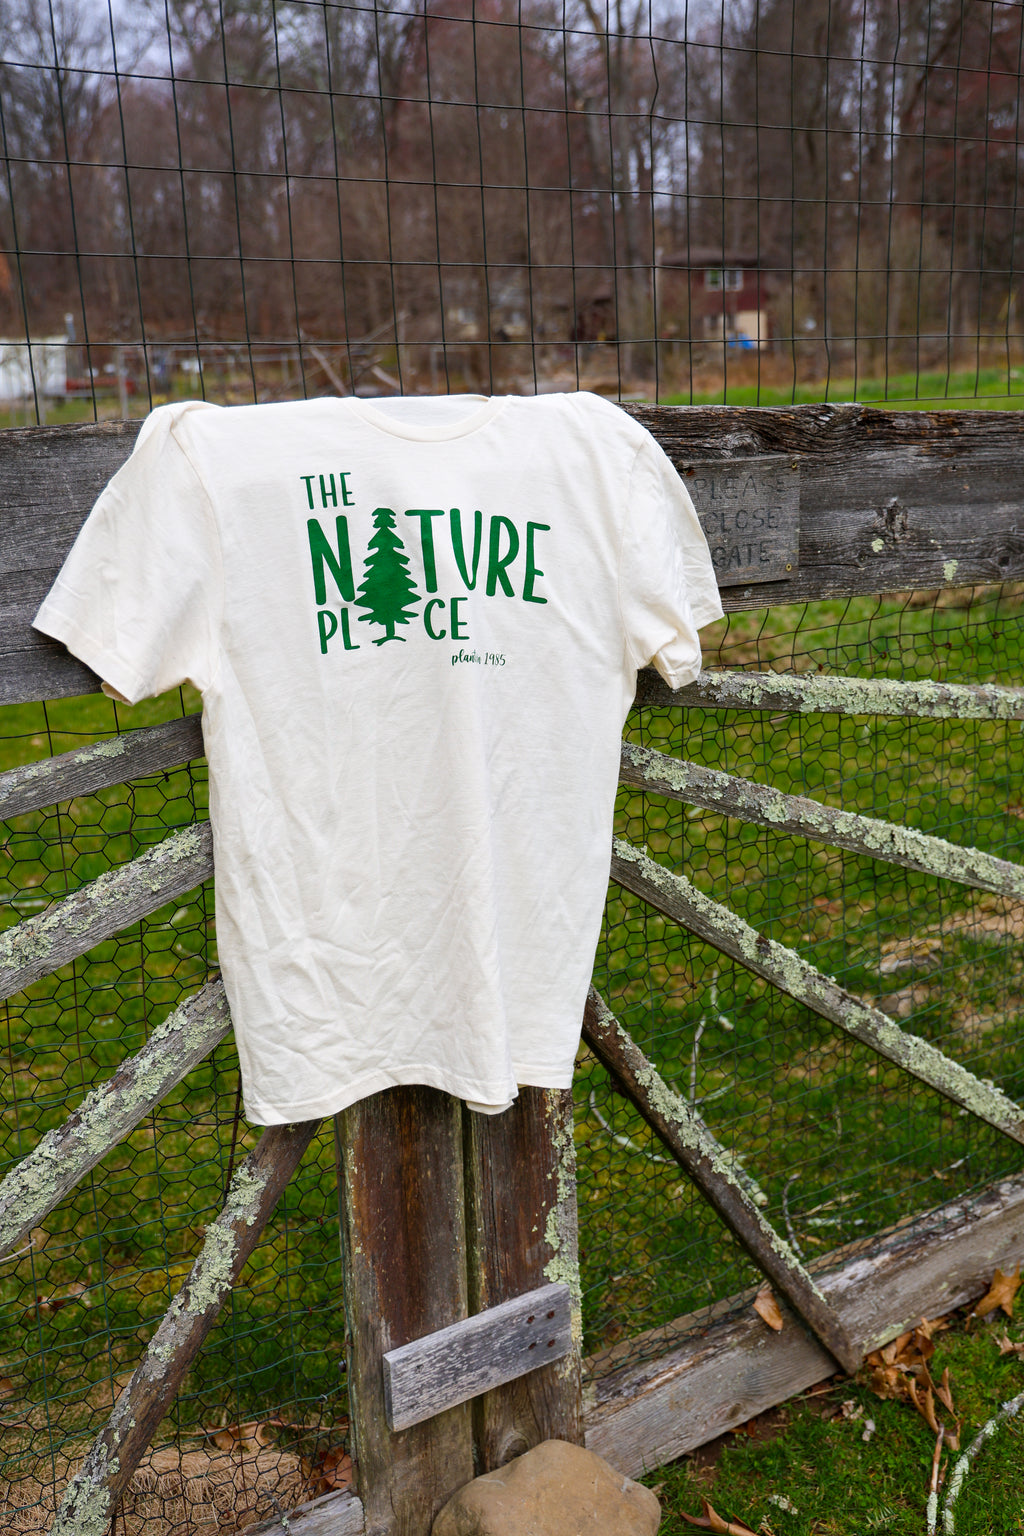 Limited Speical Addition Tree-Shirt, Nature Place Name with big pine tree instead of A